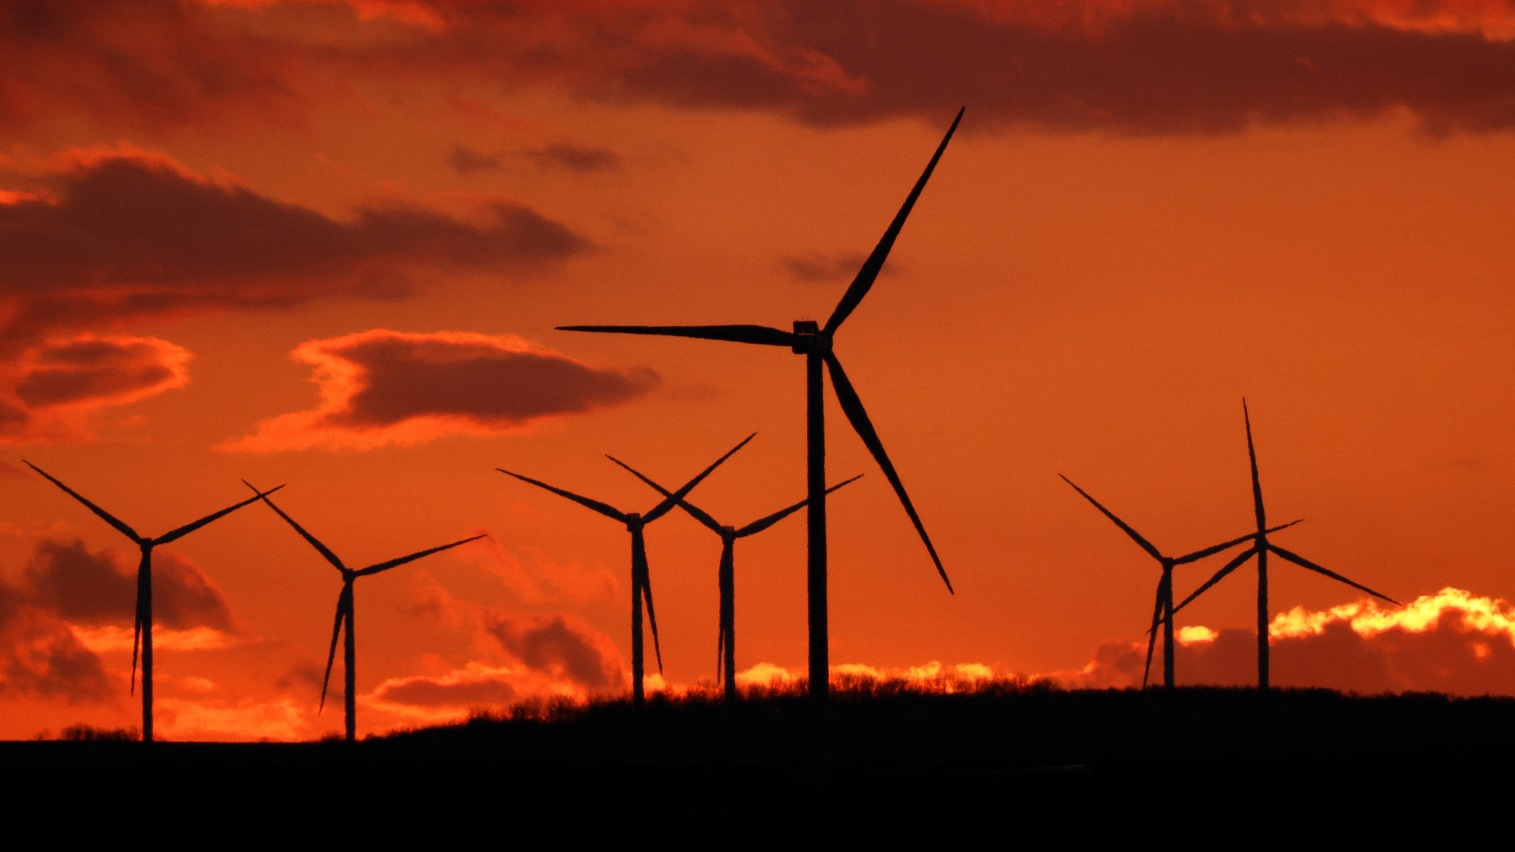 Earth metals are a crucial element for wind turbines. /Pascal Rossignol/Reuters